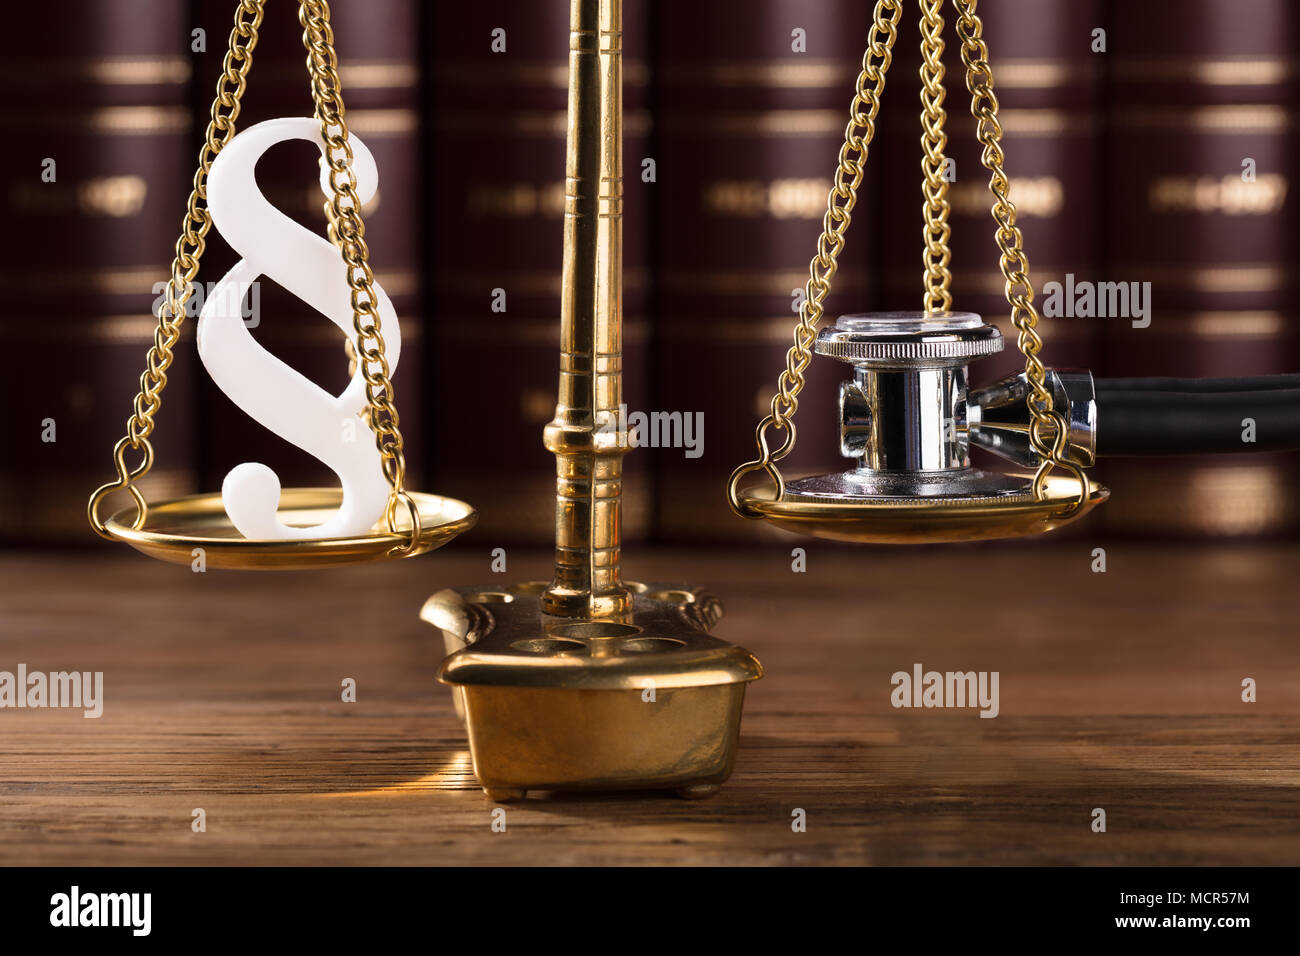 Close-up Of White Paragraph Symbol And Stethoscope On Justice Scale In Courtroom Stock Photo